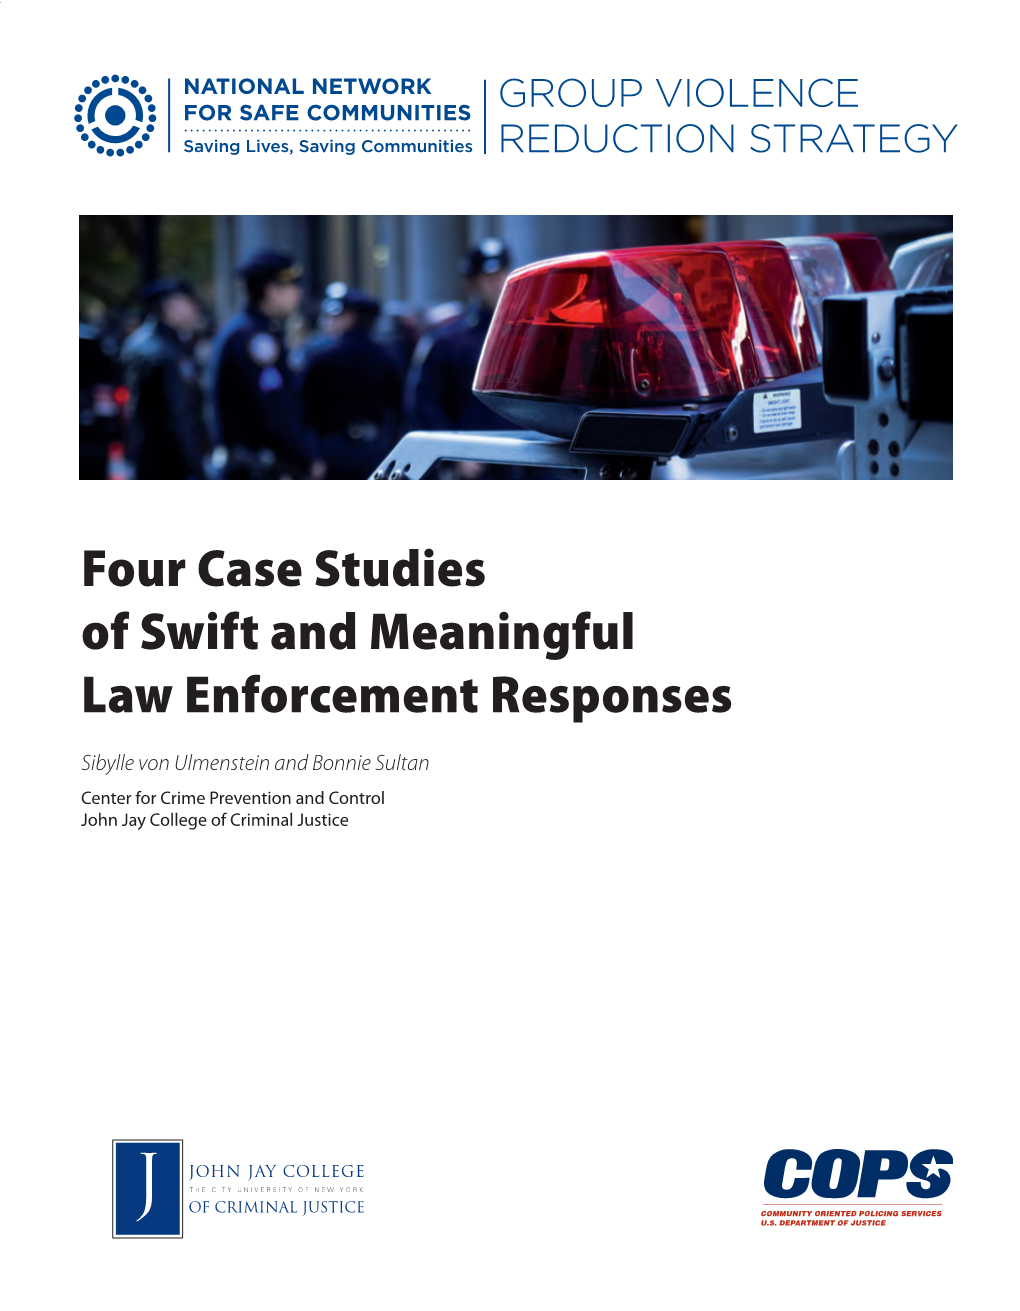 Four Case Studies of Swift and Meaningful Law Enforcement Responses